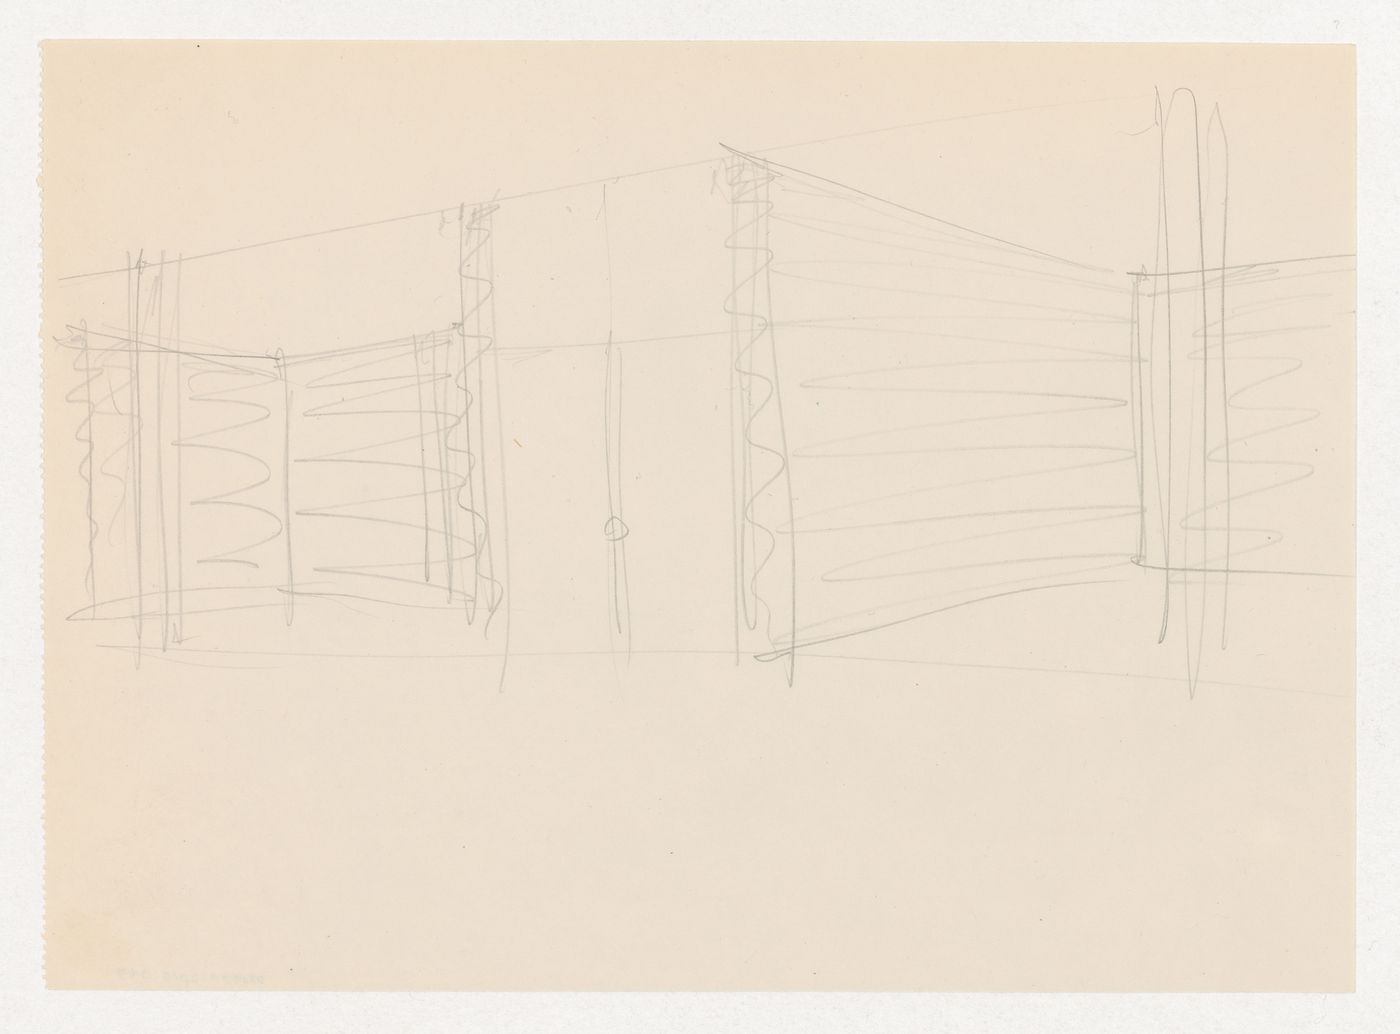 Interior perspective sketch for the Metallurgy Building, Illinois Institute of Technology, Chicago